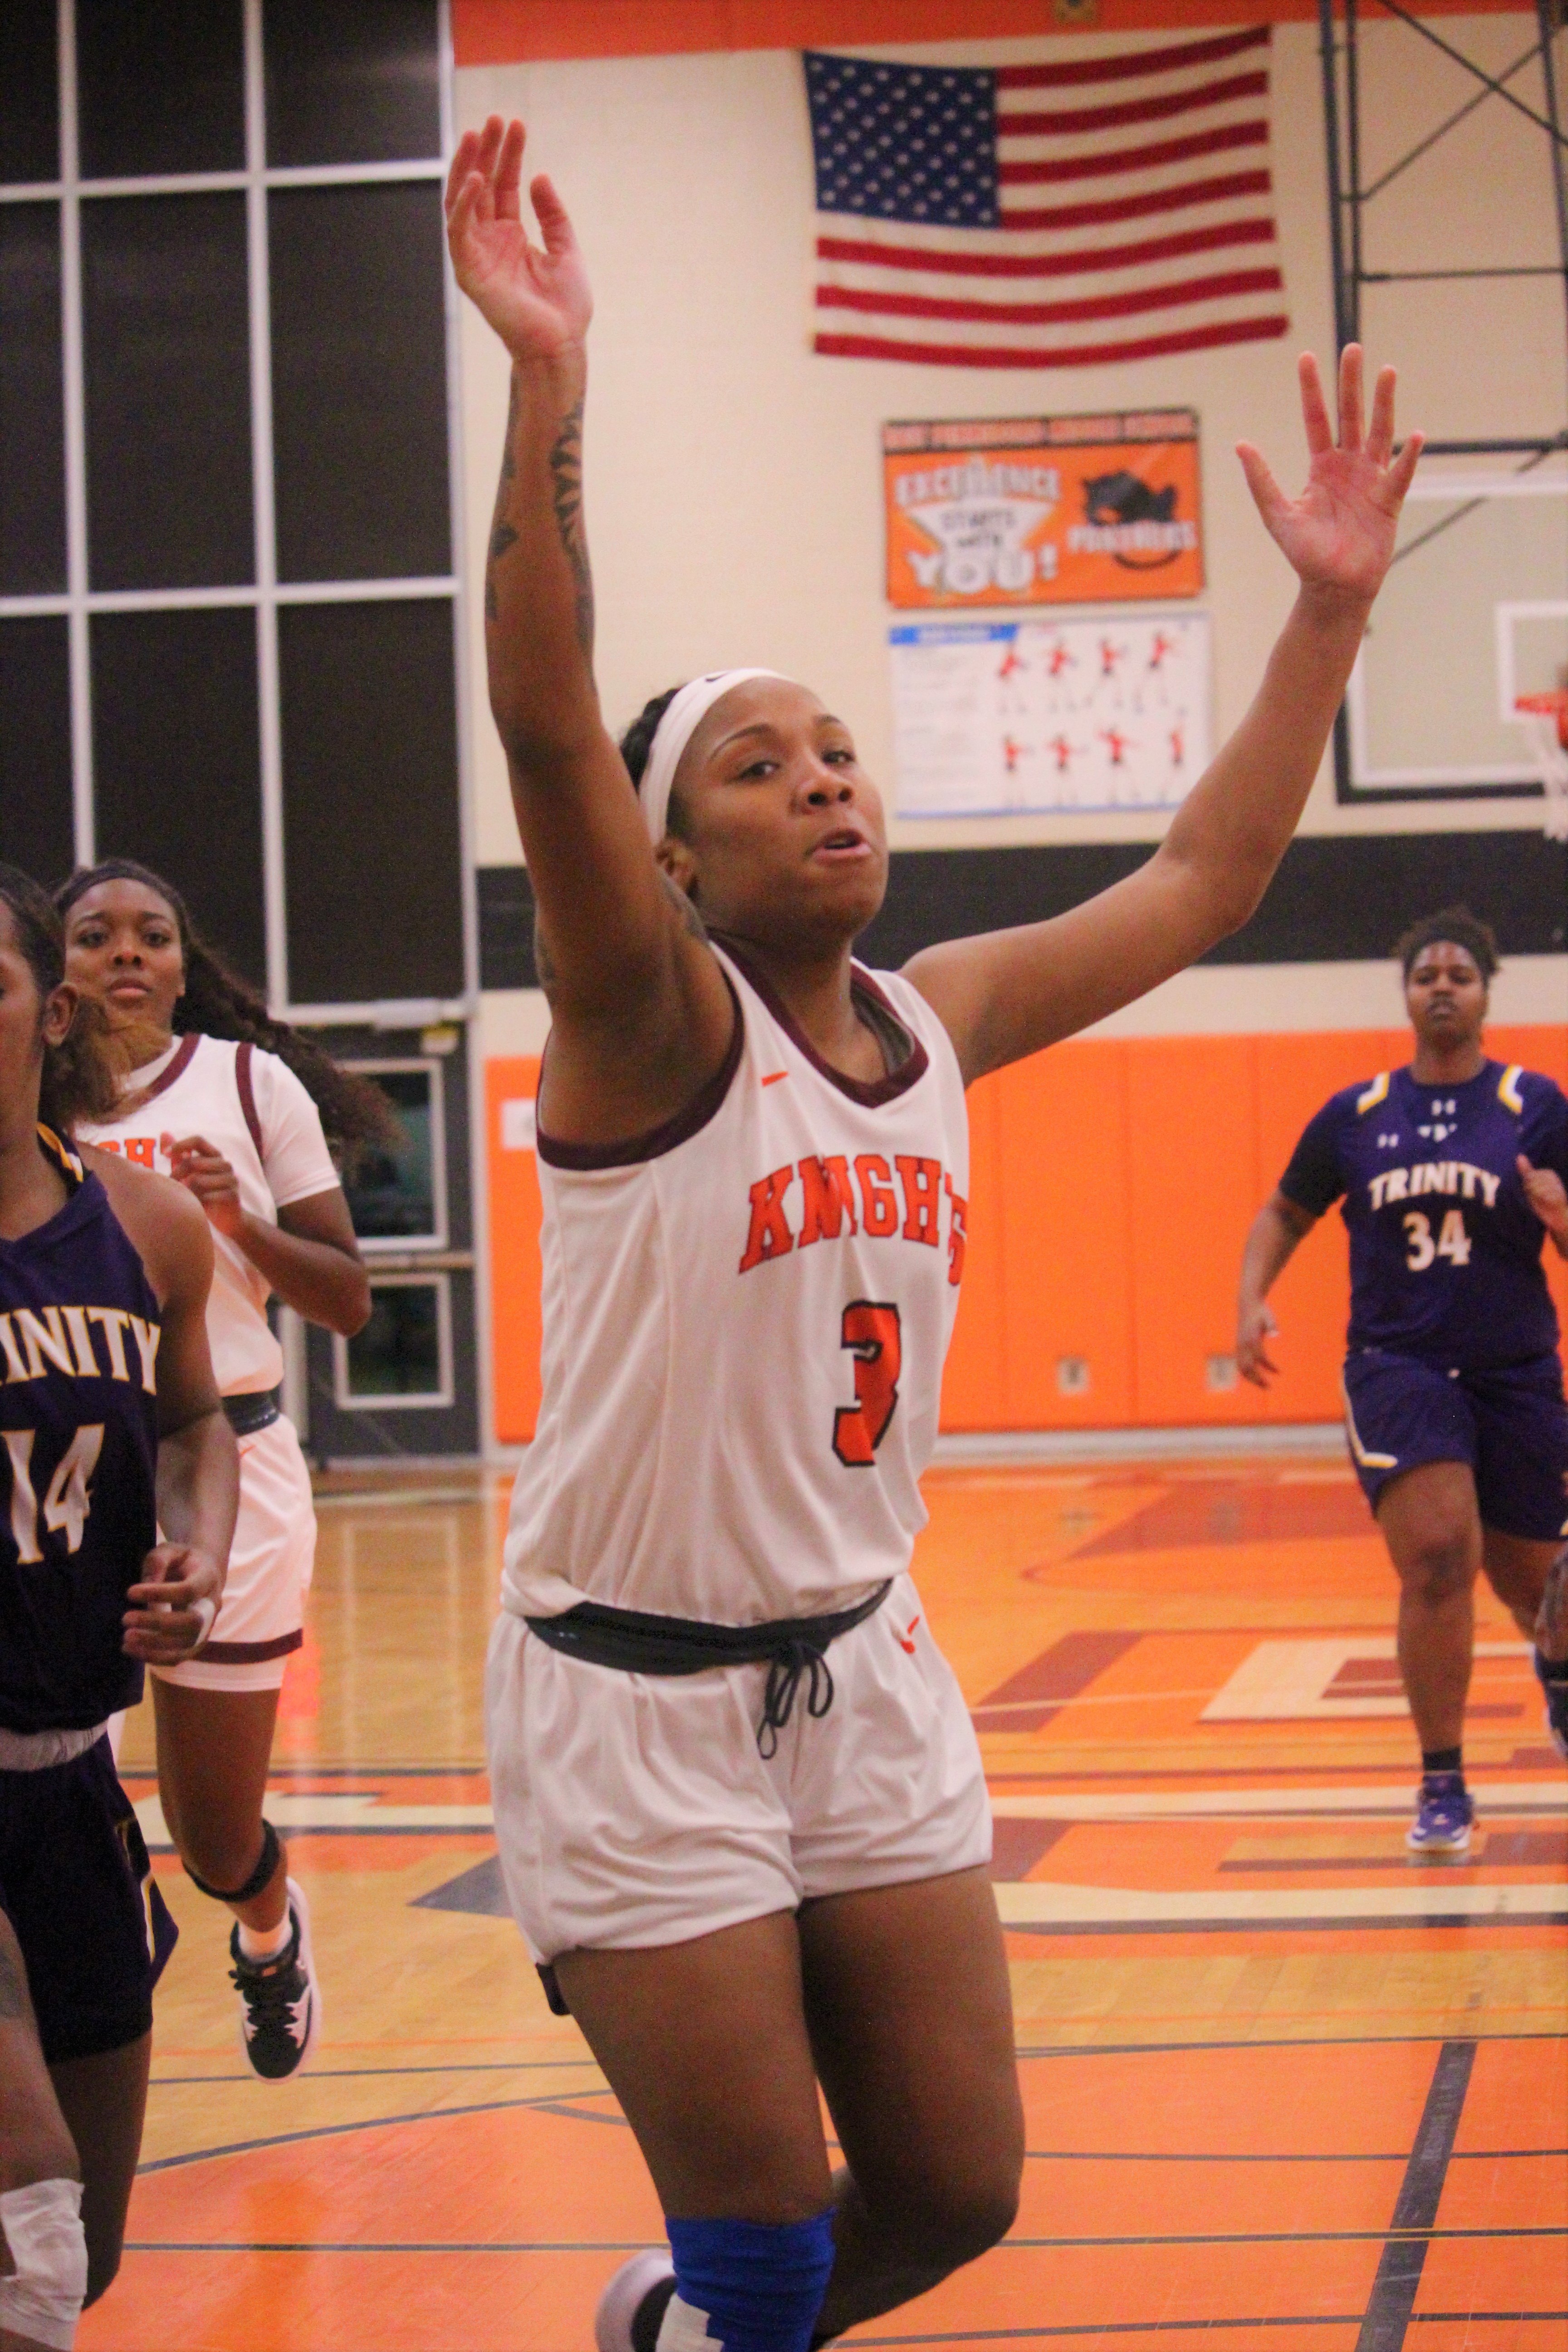 Woman -- Tahniyaah Jackson, No. 3, in an orange-on-white Knights jersey  -- Central Penn basketball player on the court signaling to a teammate to pass the ball in a 2023 game Trinity.